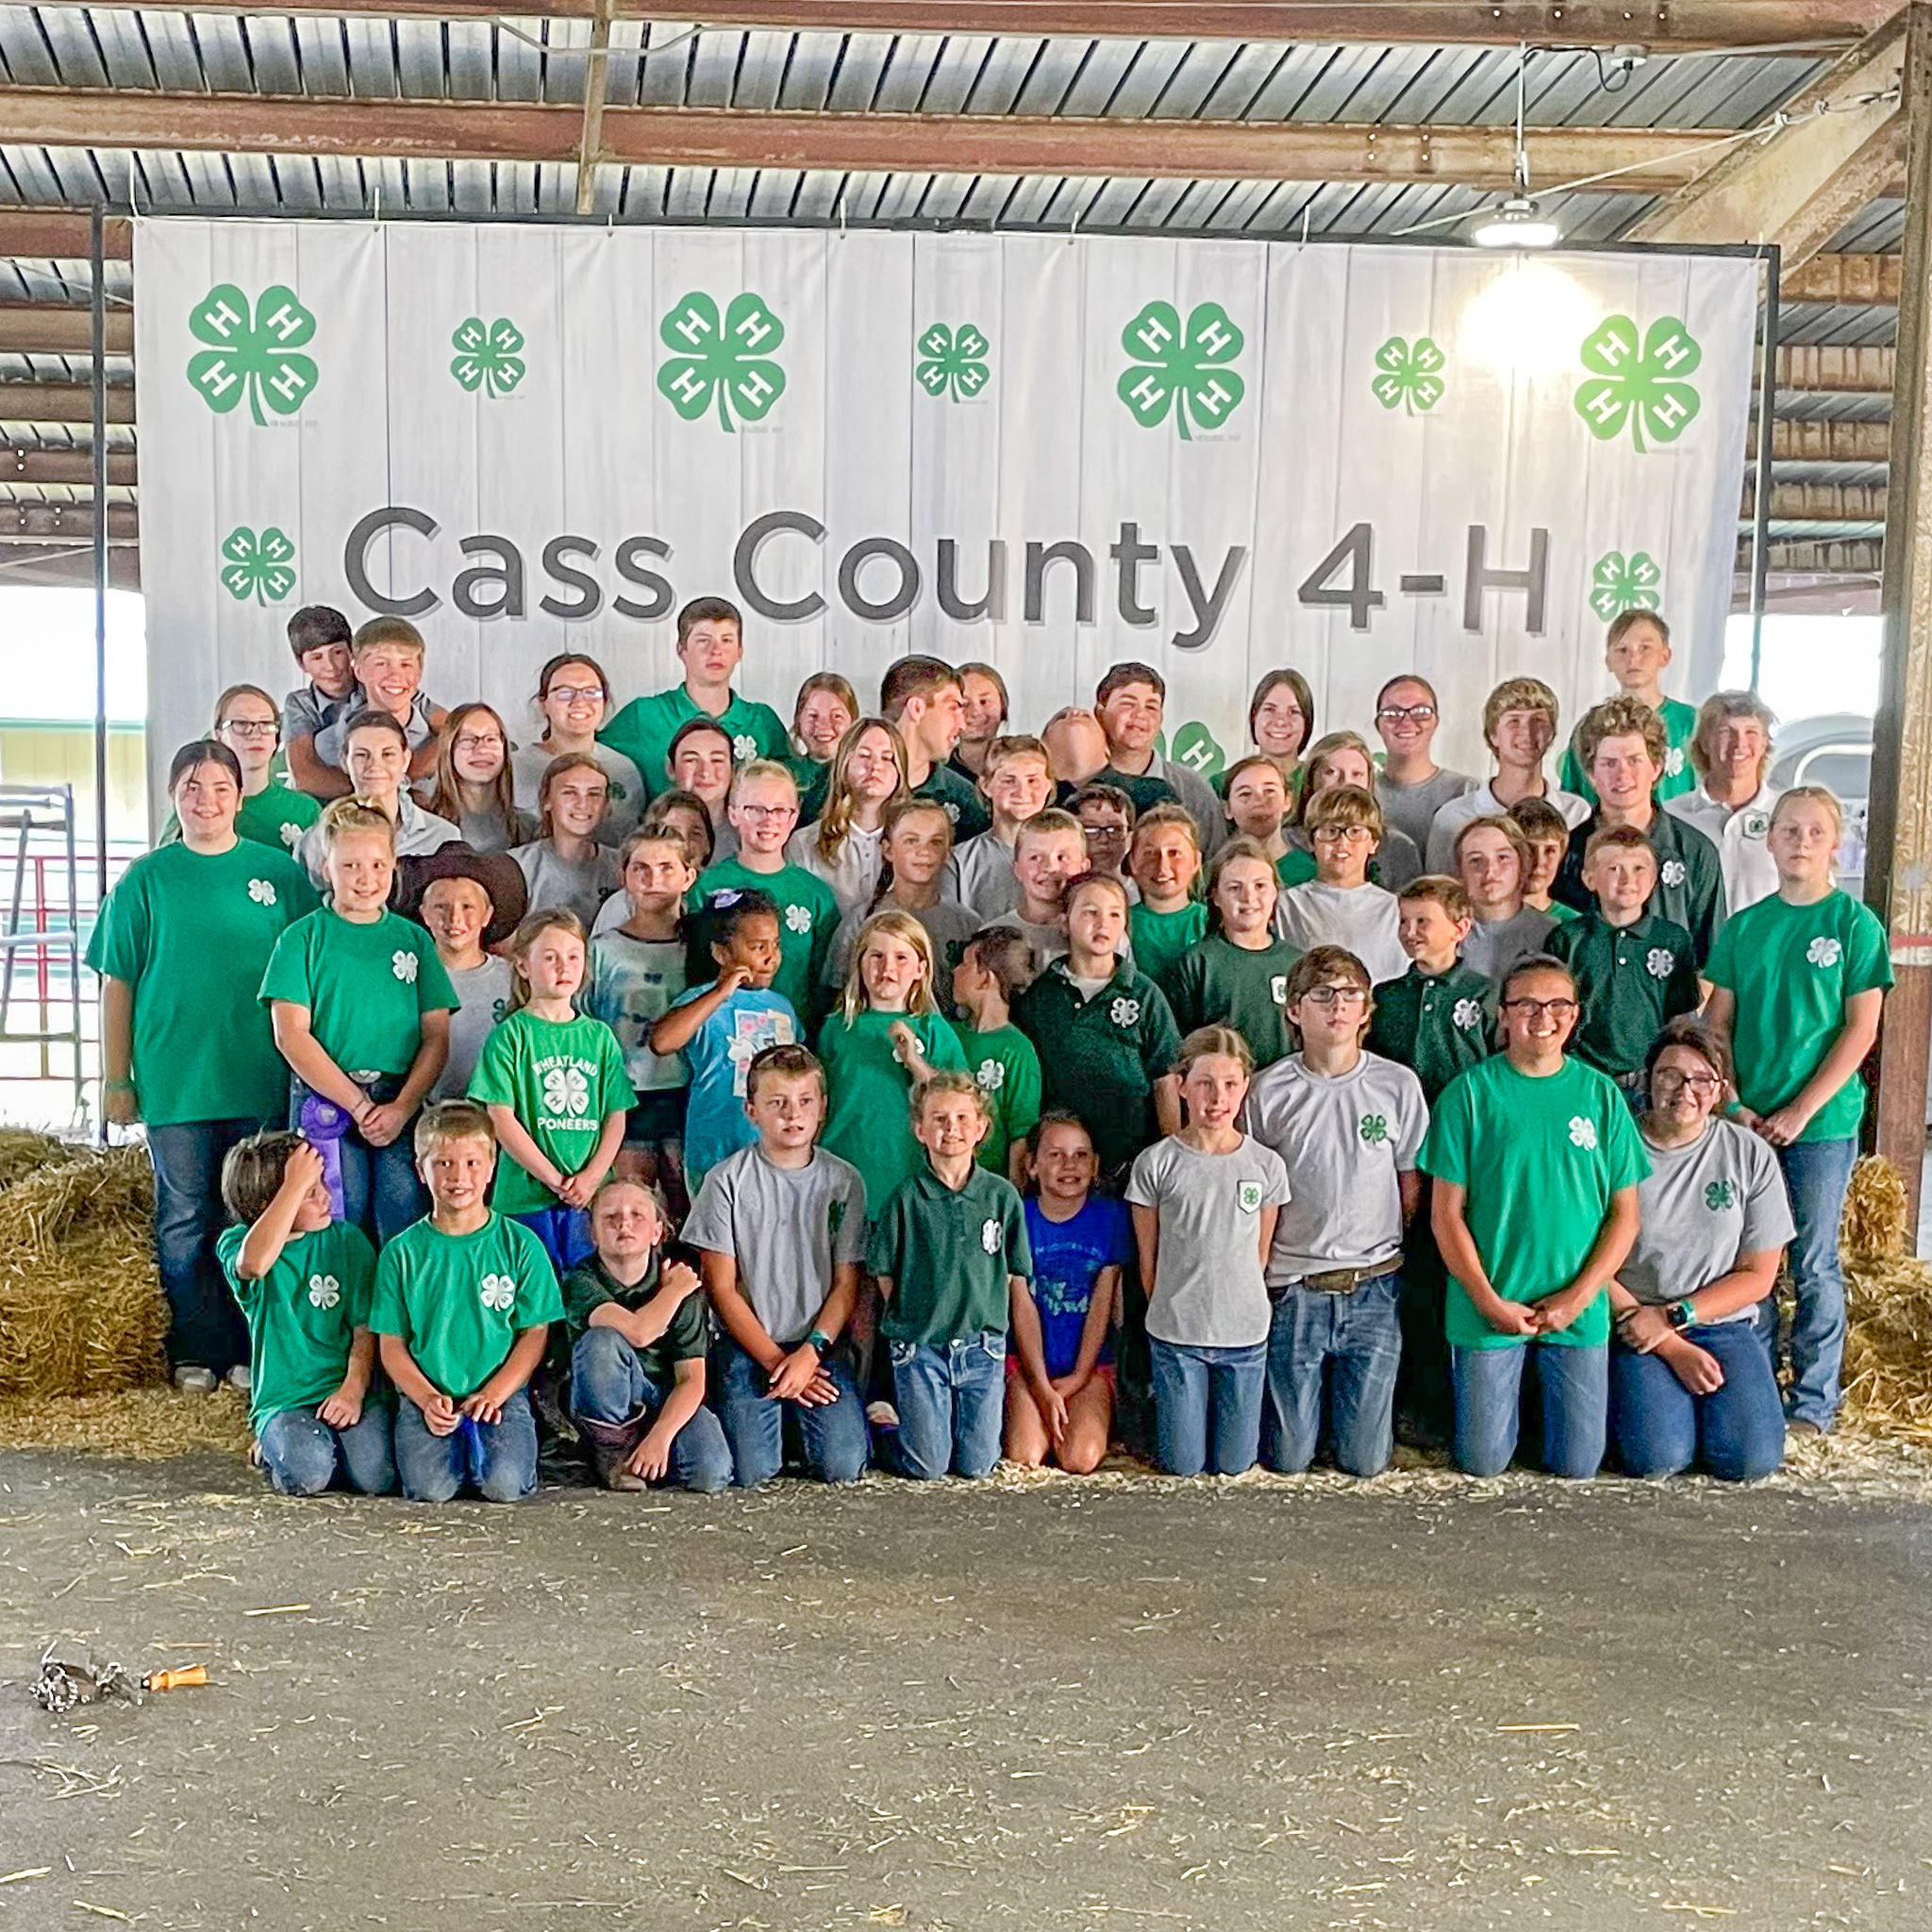 The participants in the Cass County 4-H